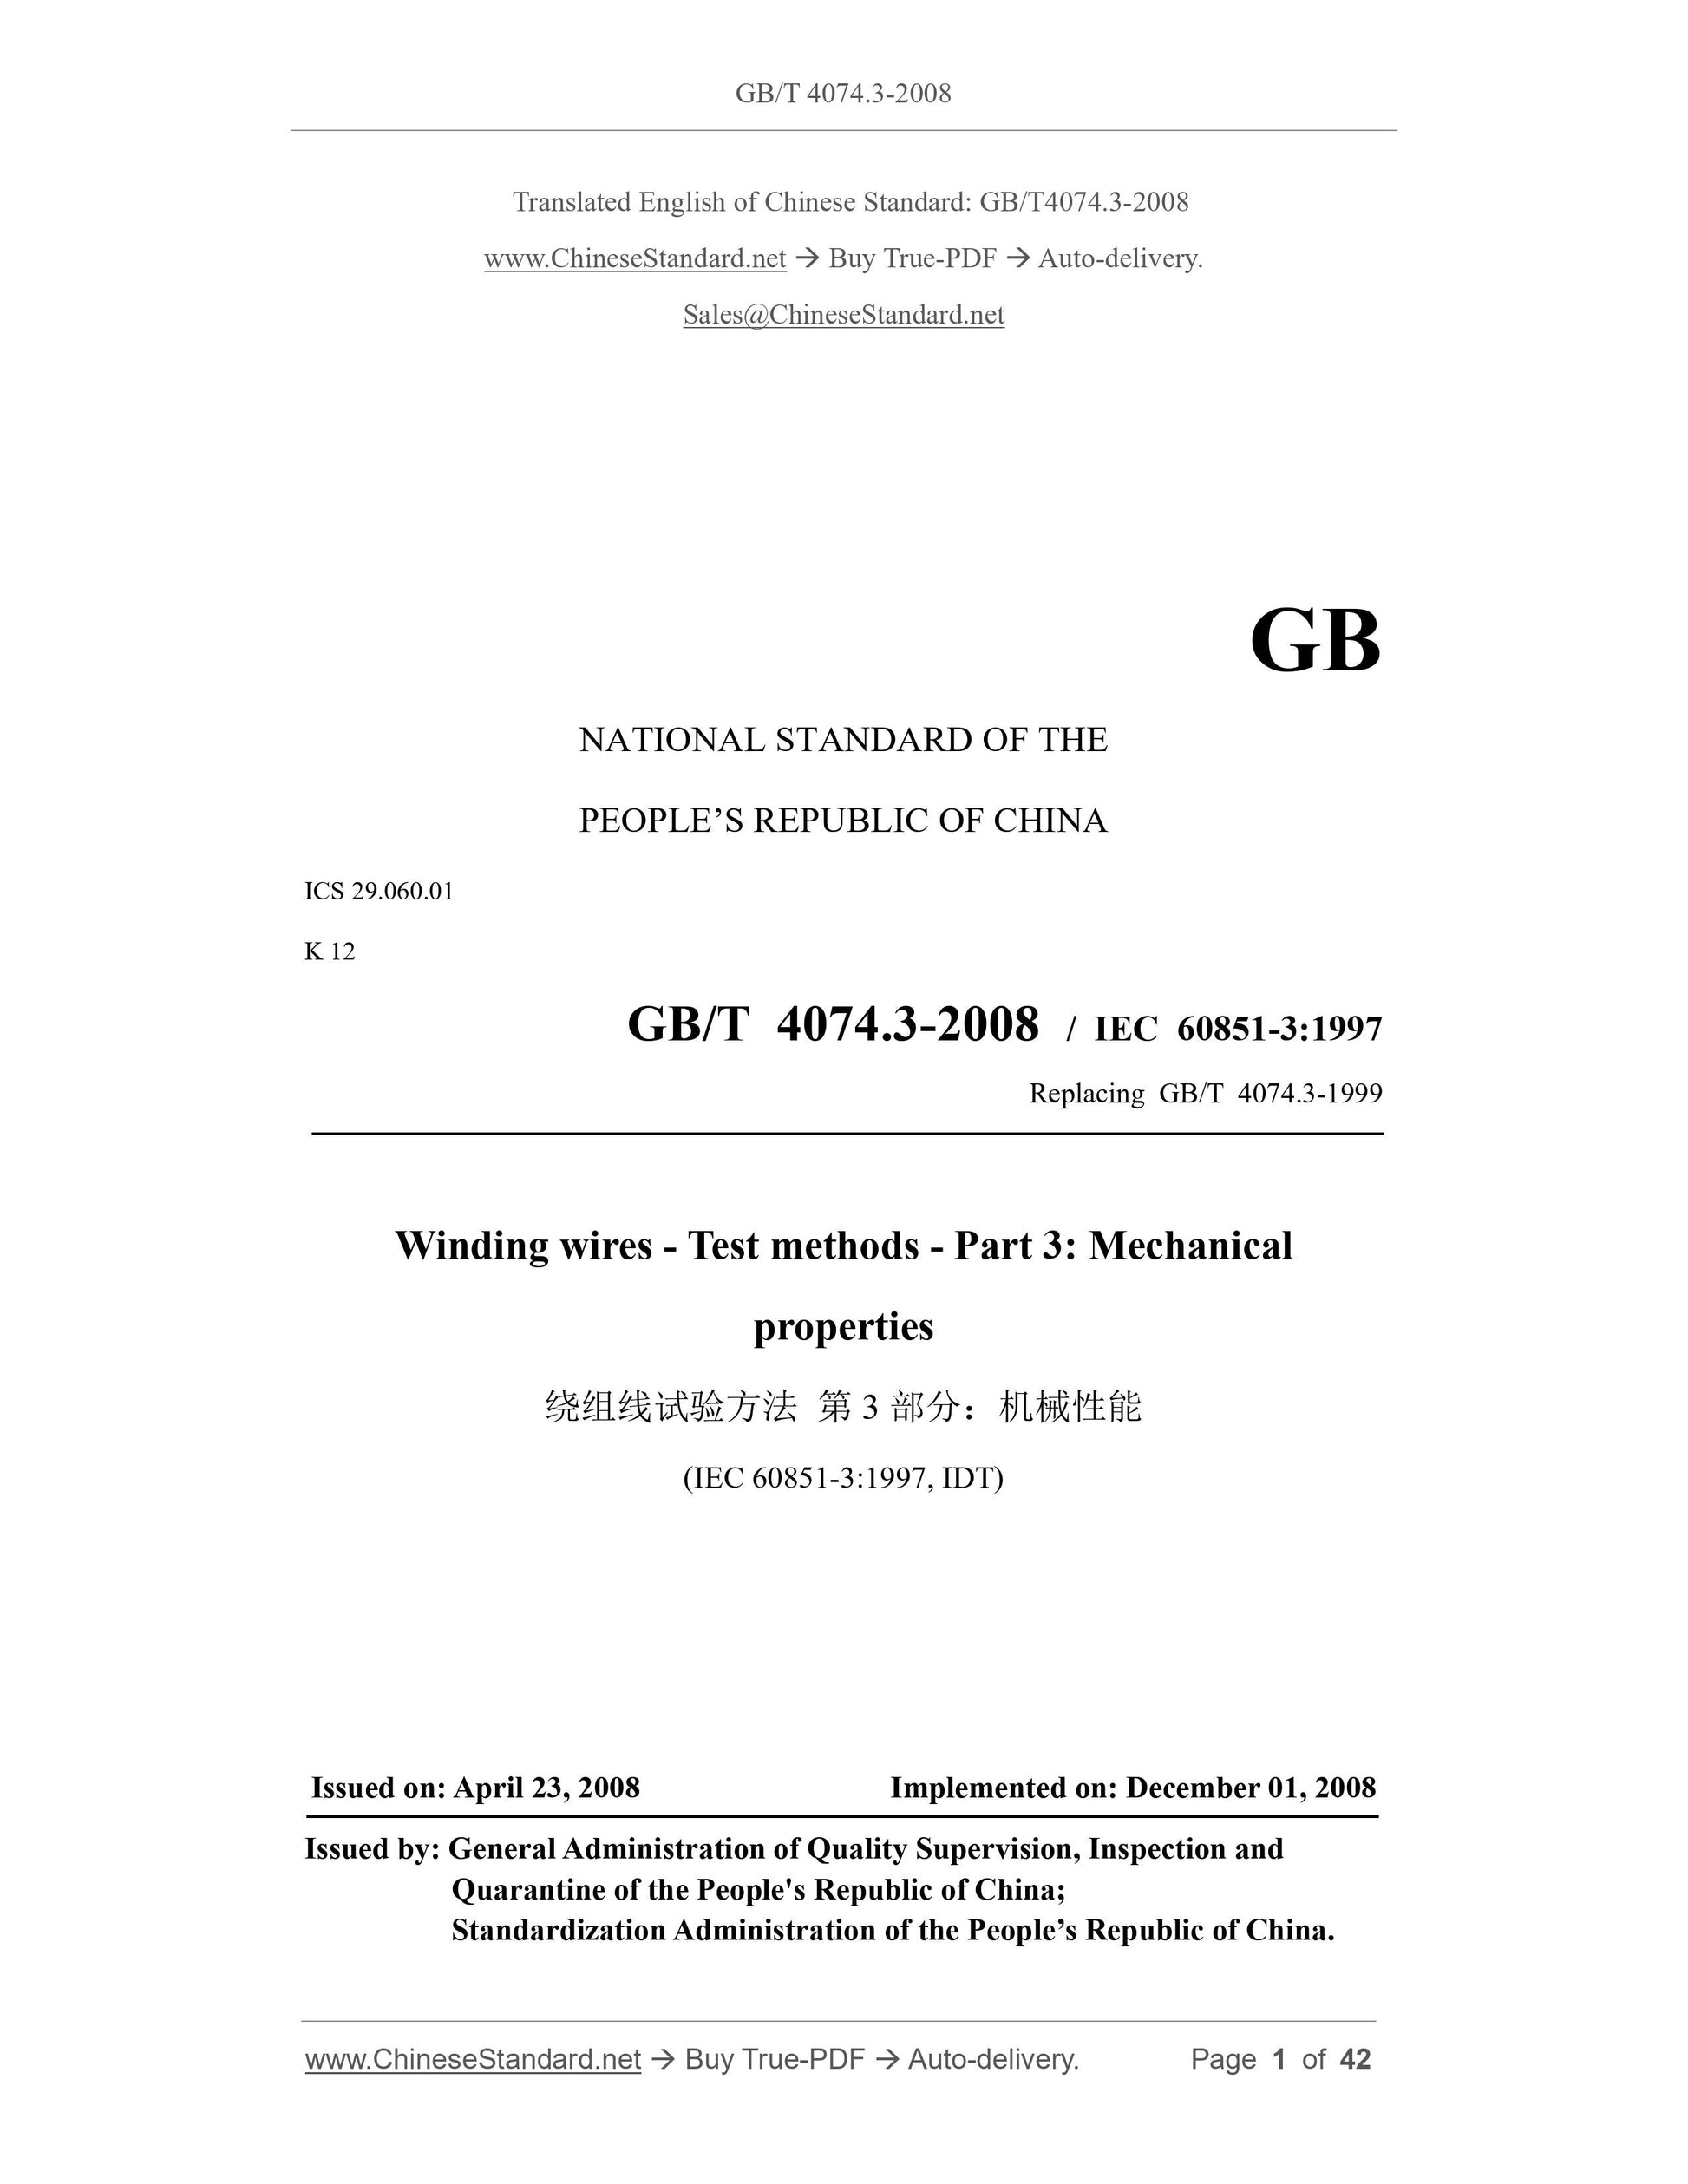 GB/T 4074.3-2008 Page 1